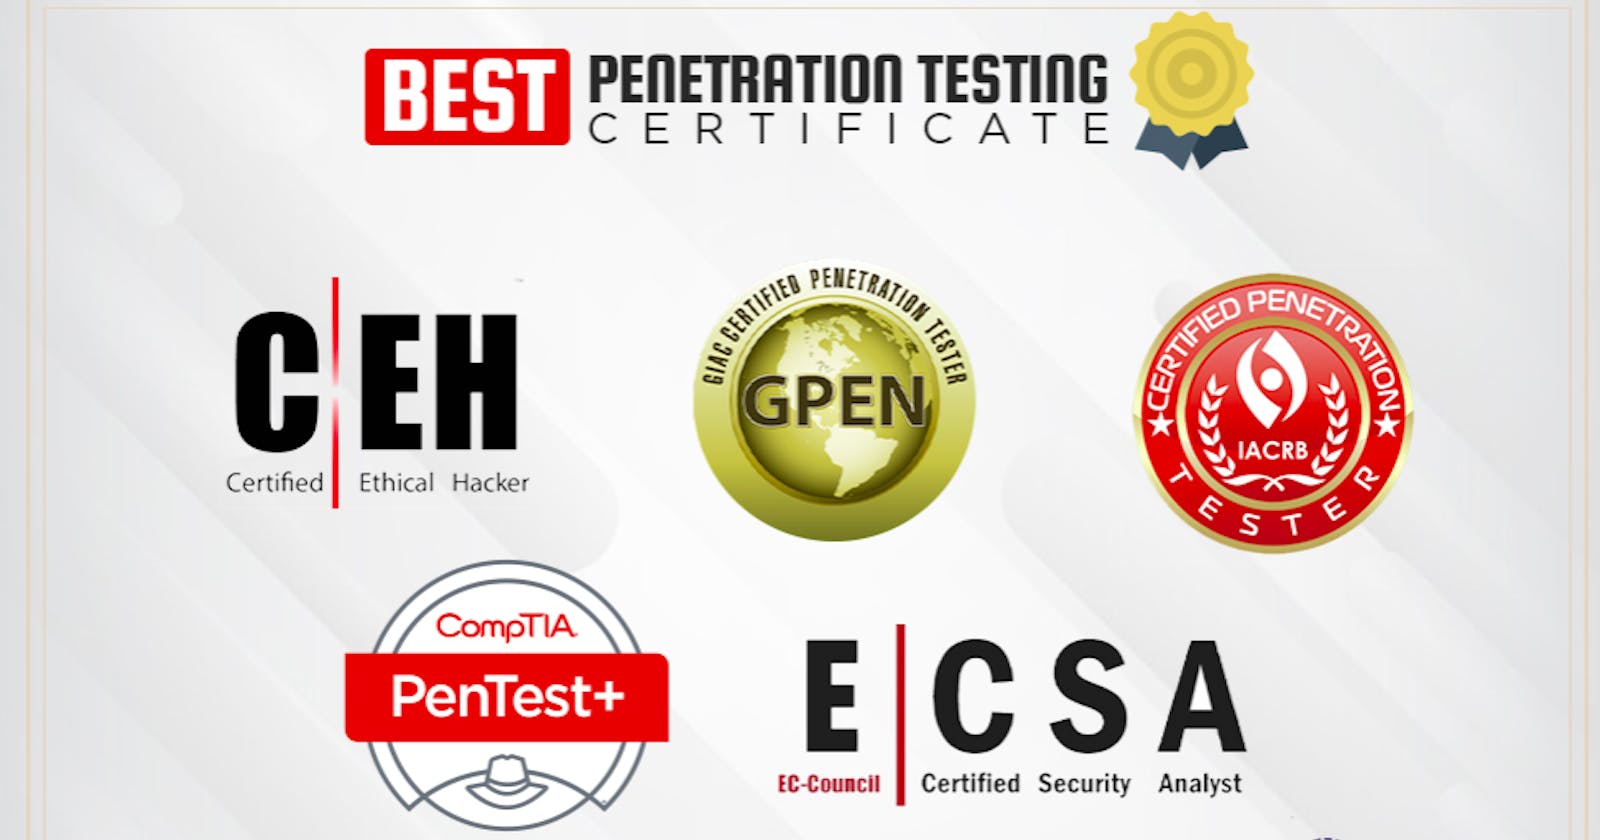 Certifications in Security Testing